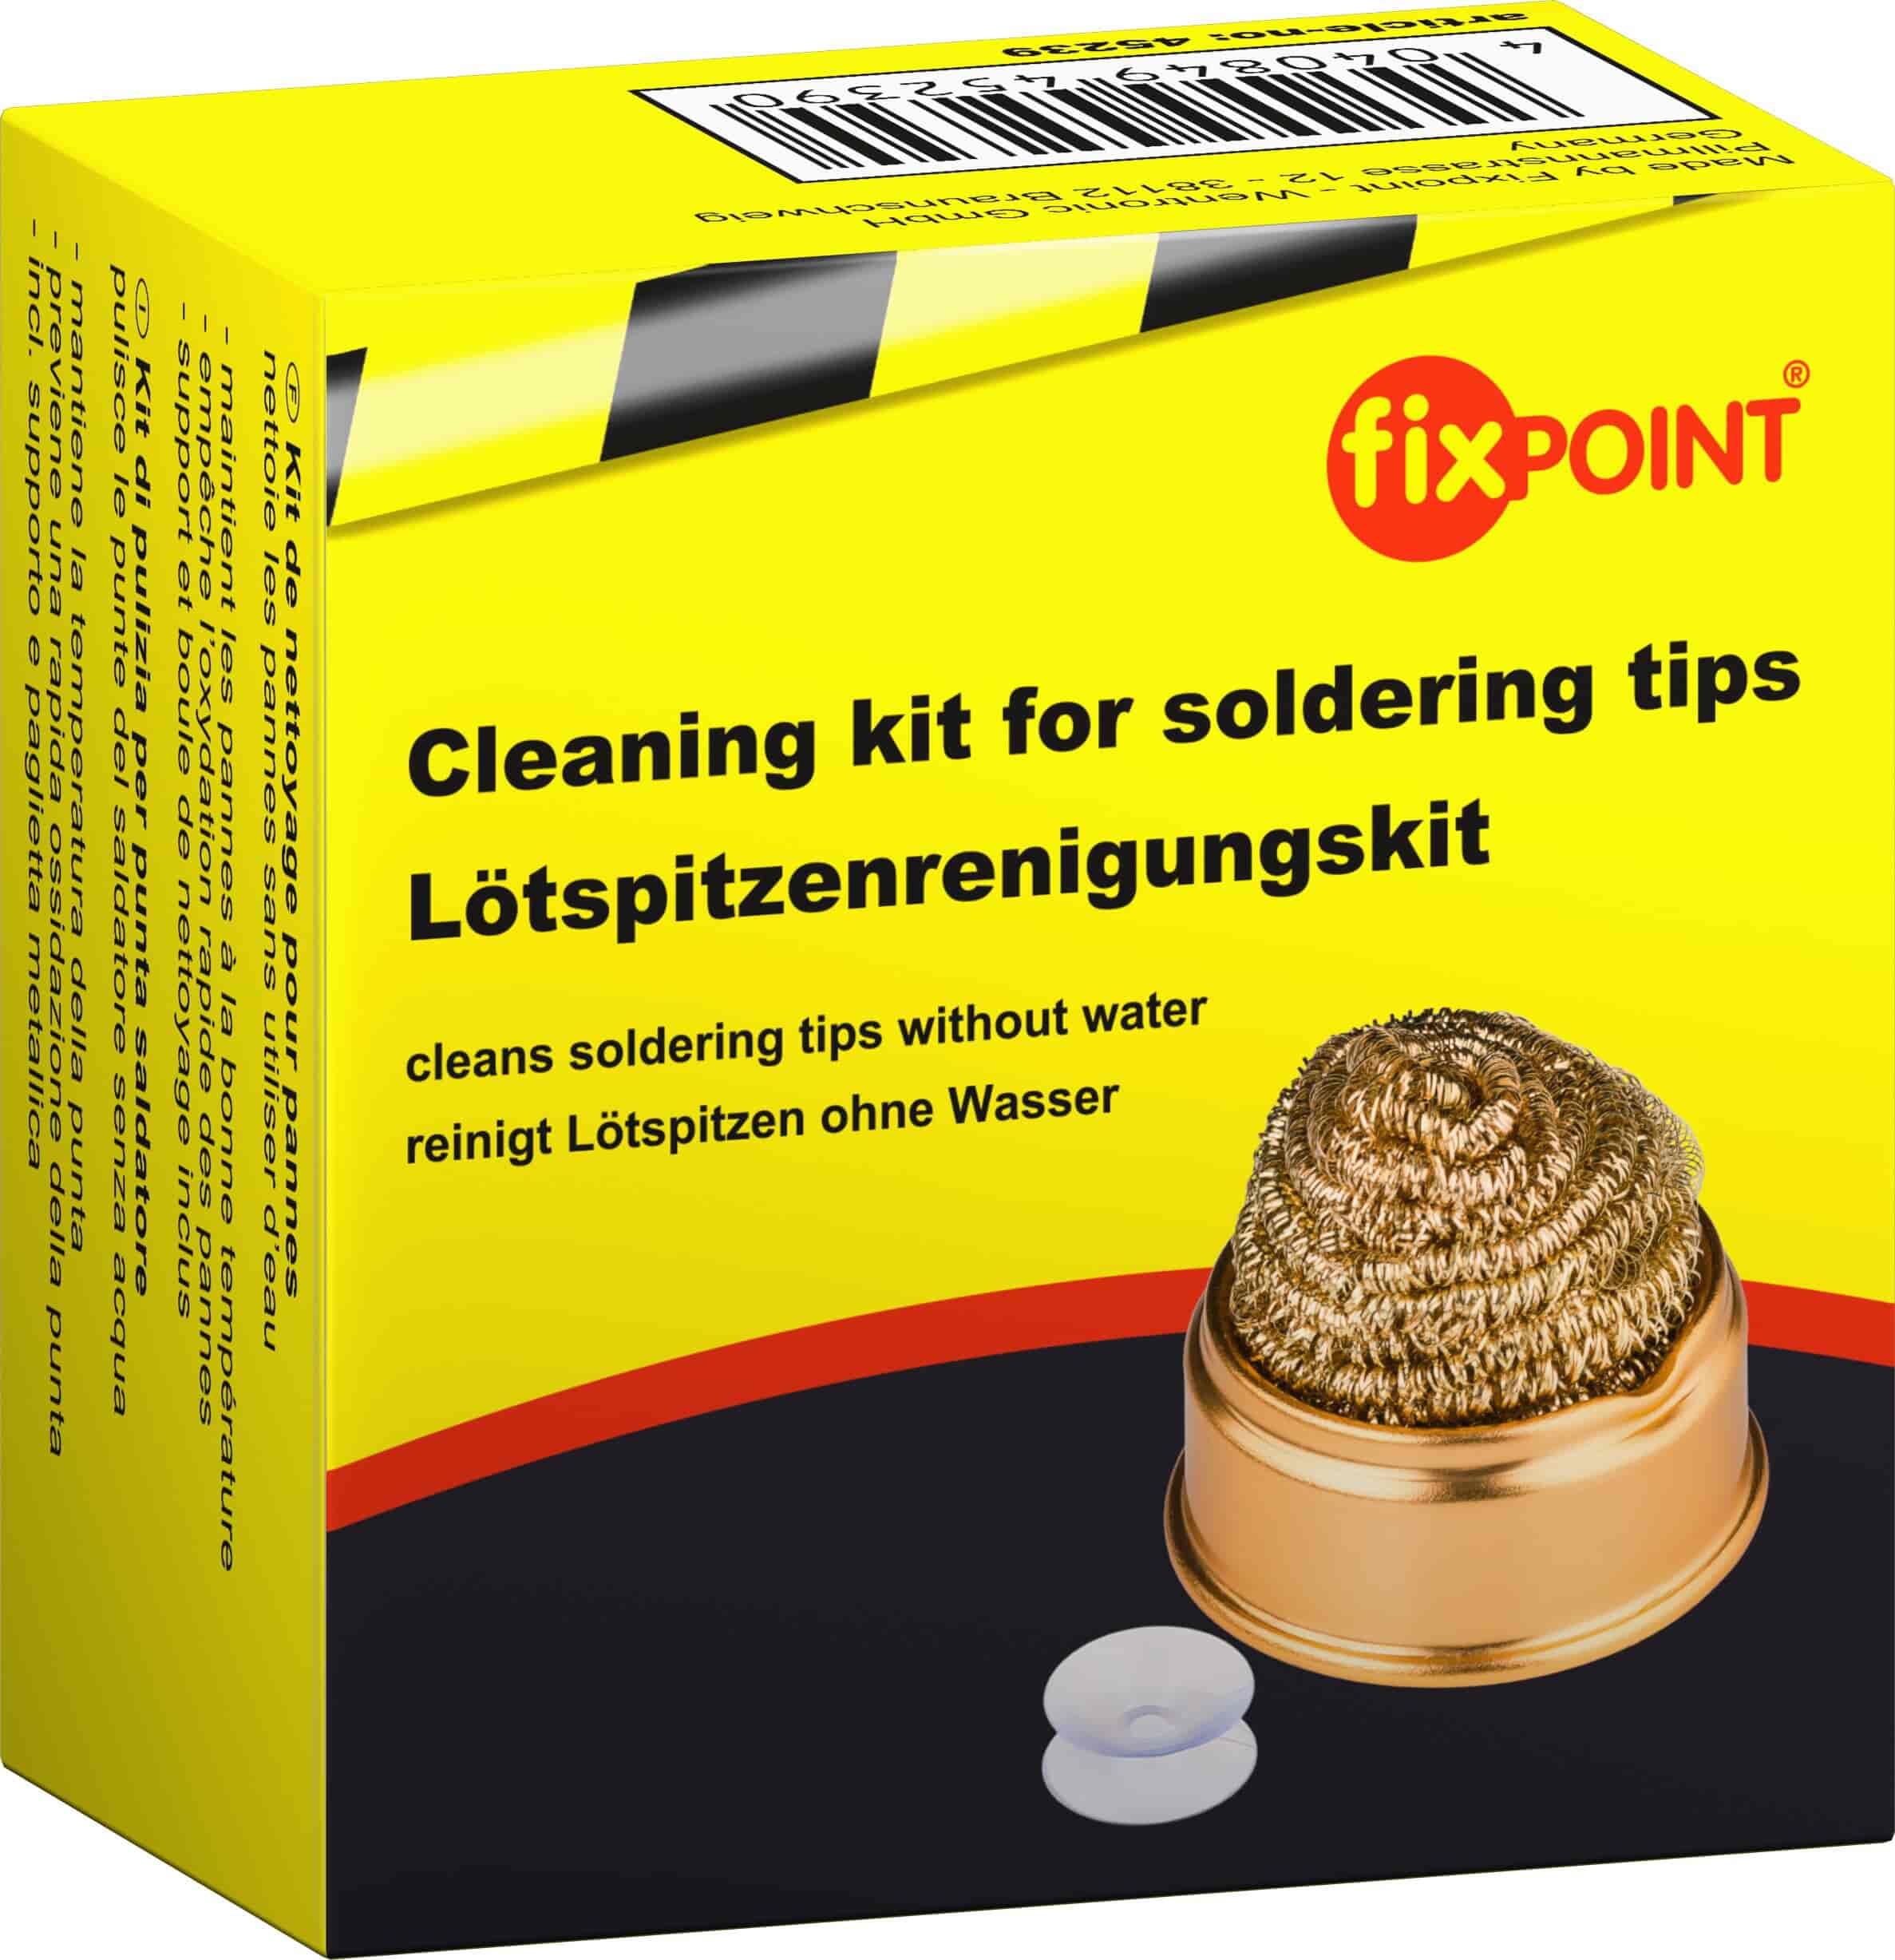 Soldering tips cleaning kit